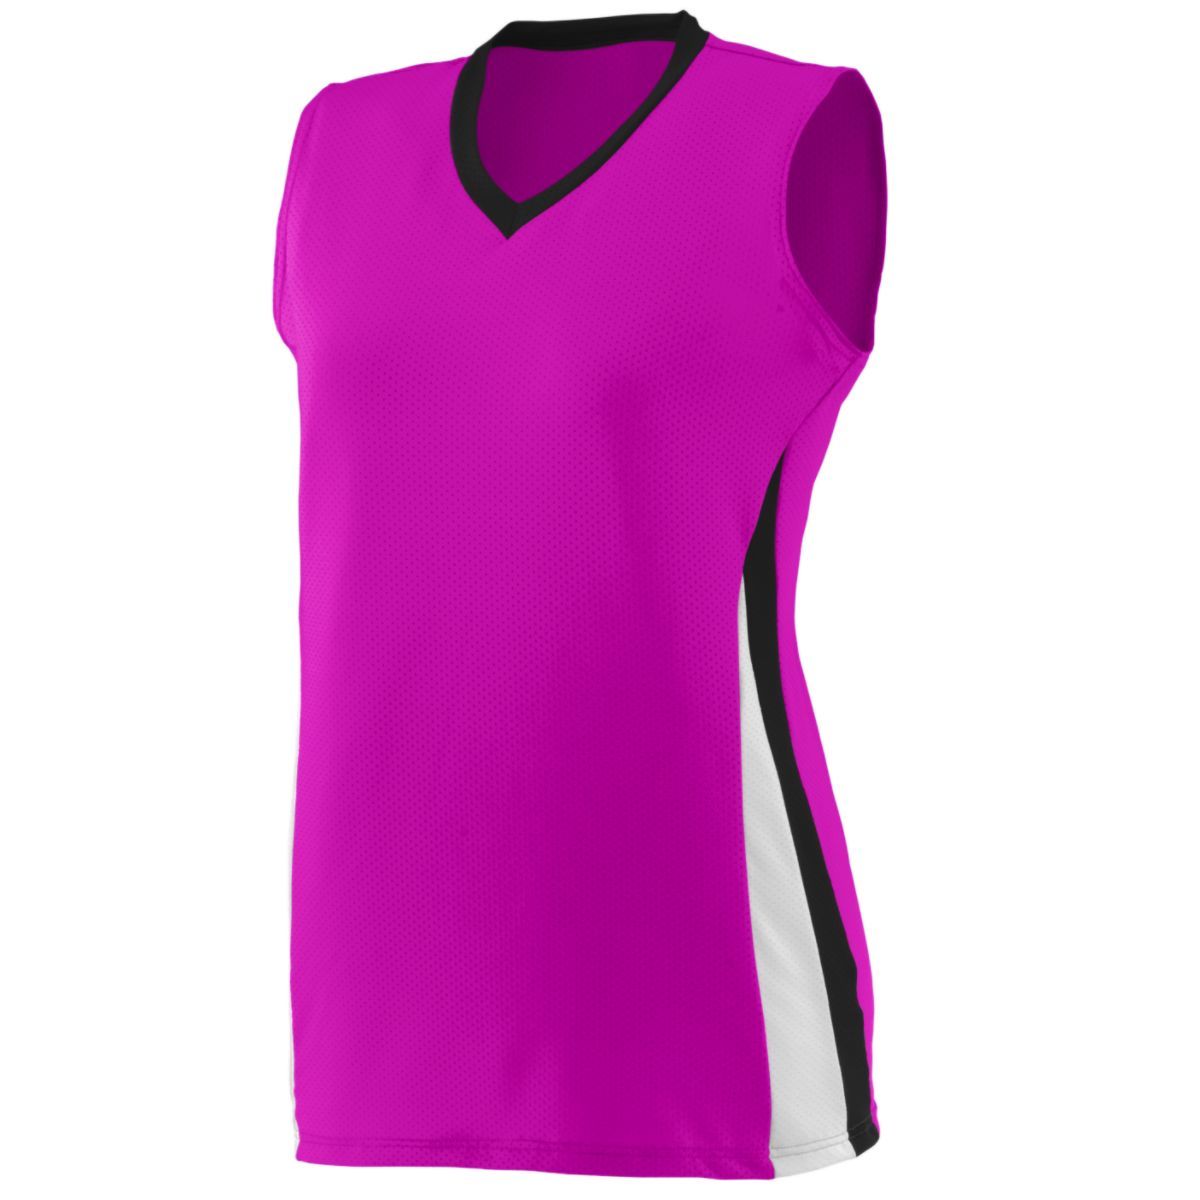 Augusta Sportswear Ladies Tornado Jersey in Power Pink/Black/White  -Part of the Ladies, Ladies-Jersey, Augusta-Products, Volleyball, Shirts product lines at KanaleyCreations.com